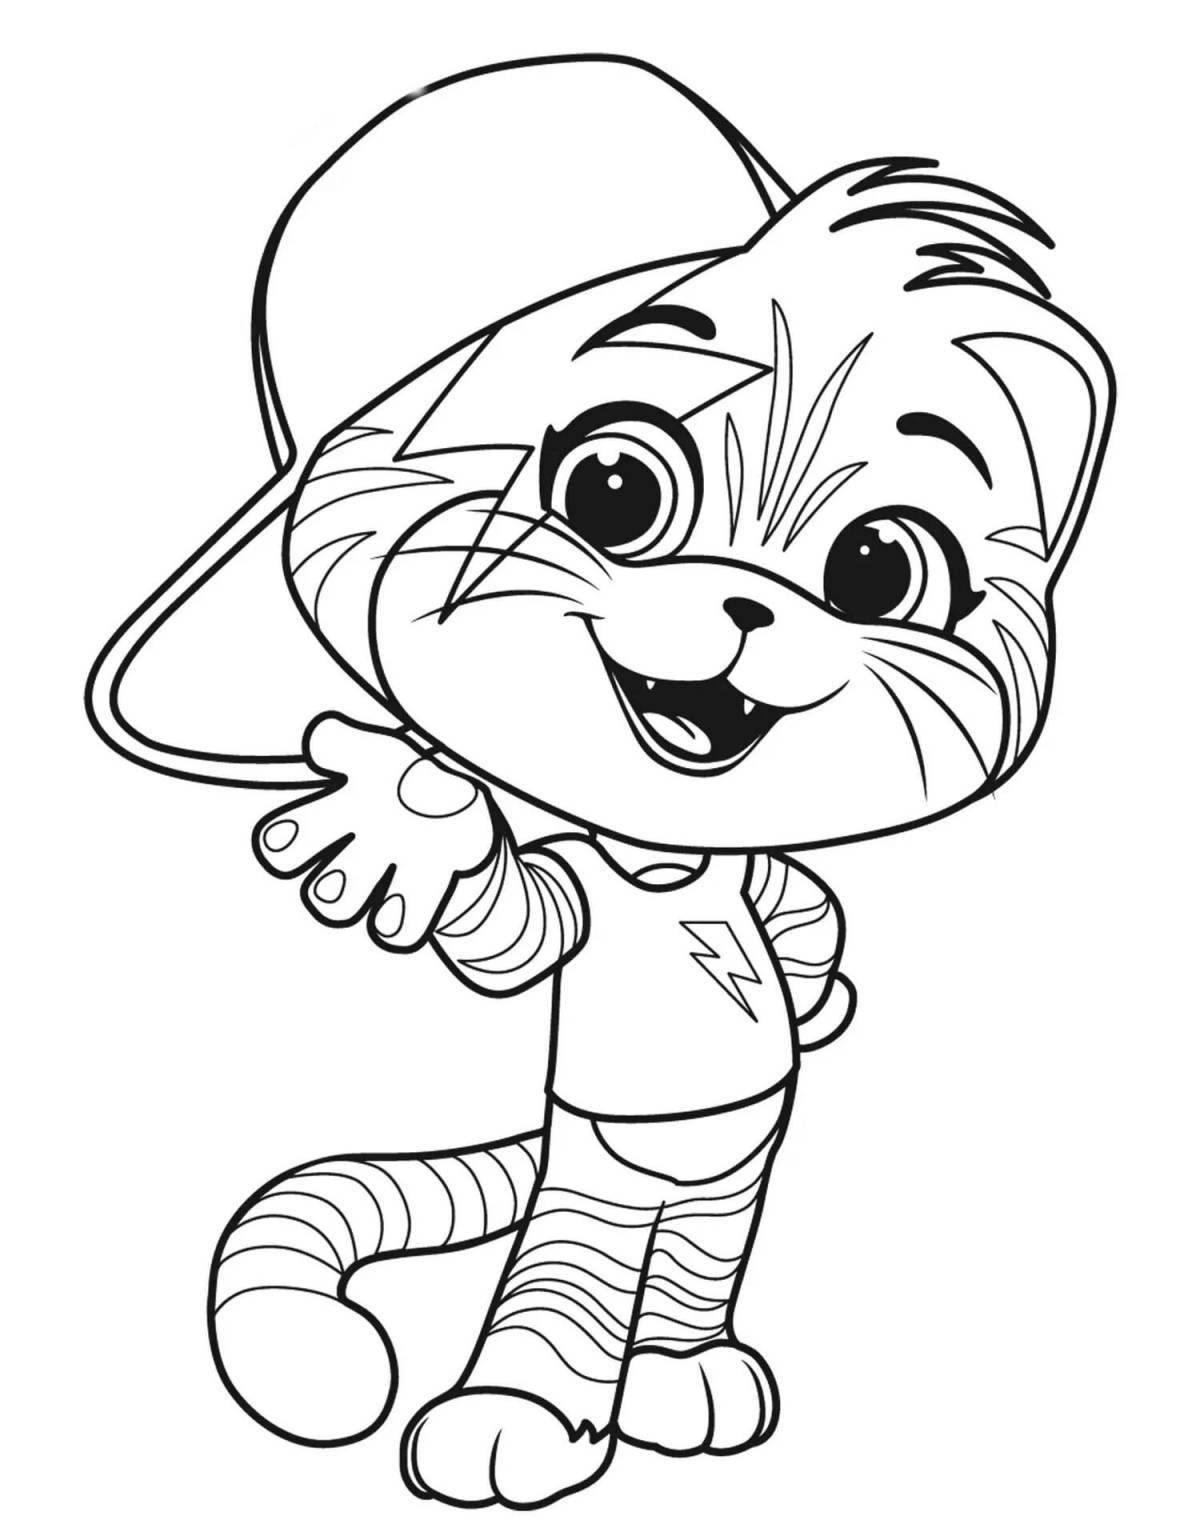 Whimsical cartoon characters coloring book for 3-4 year olds